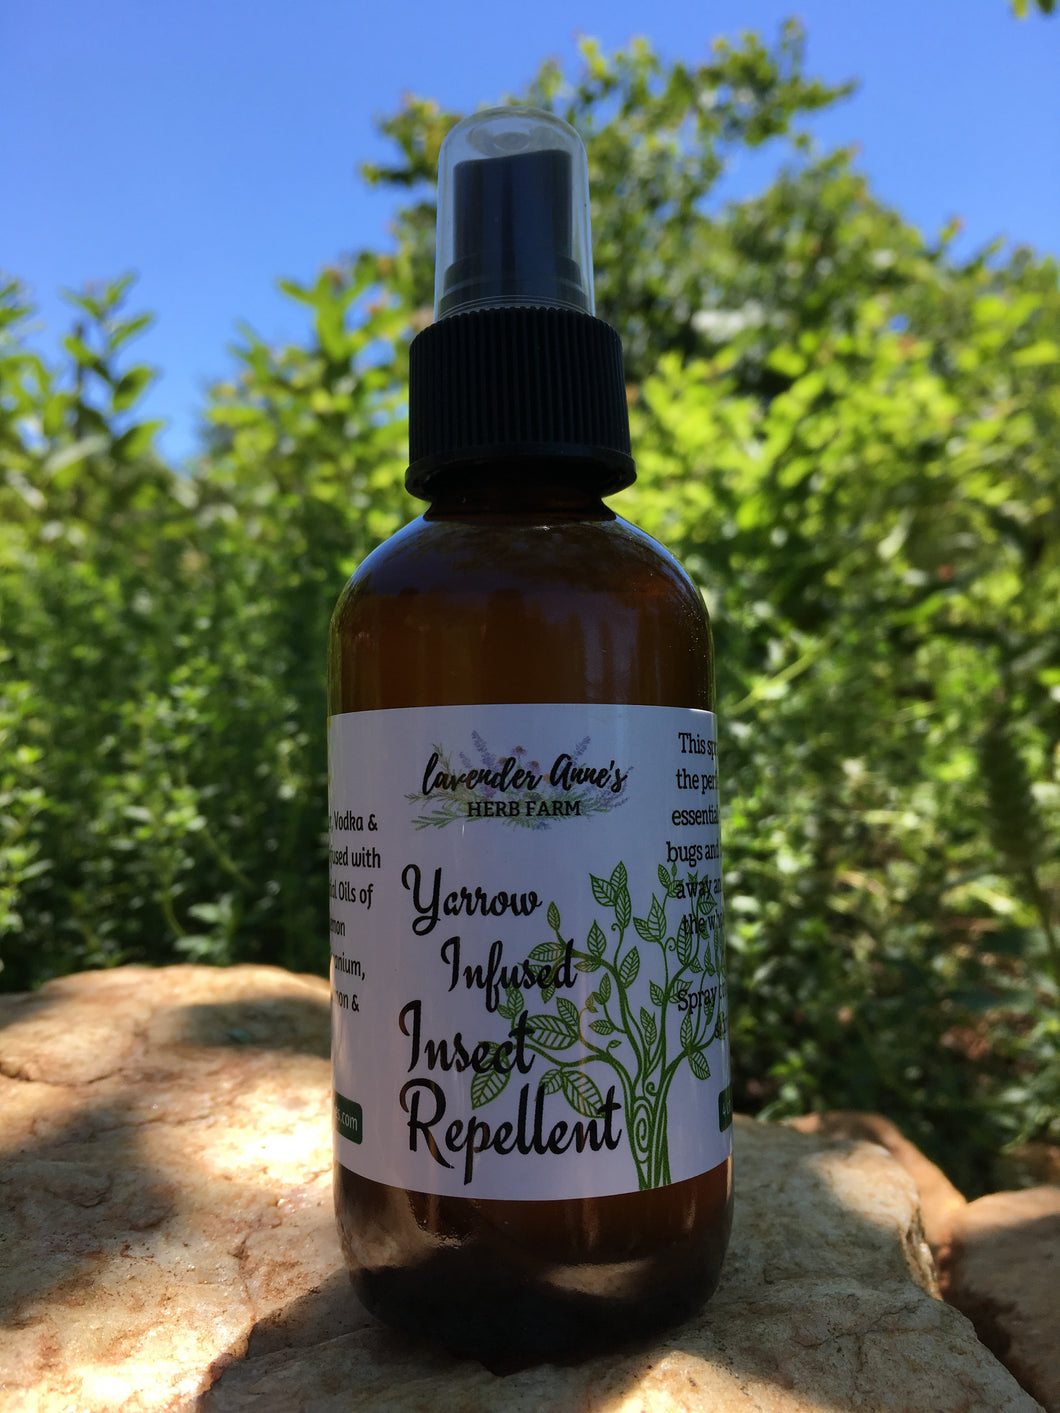 Insect Repellent